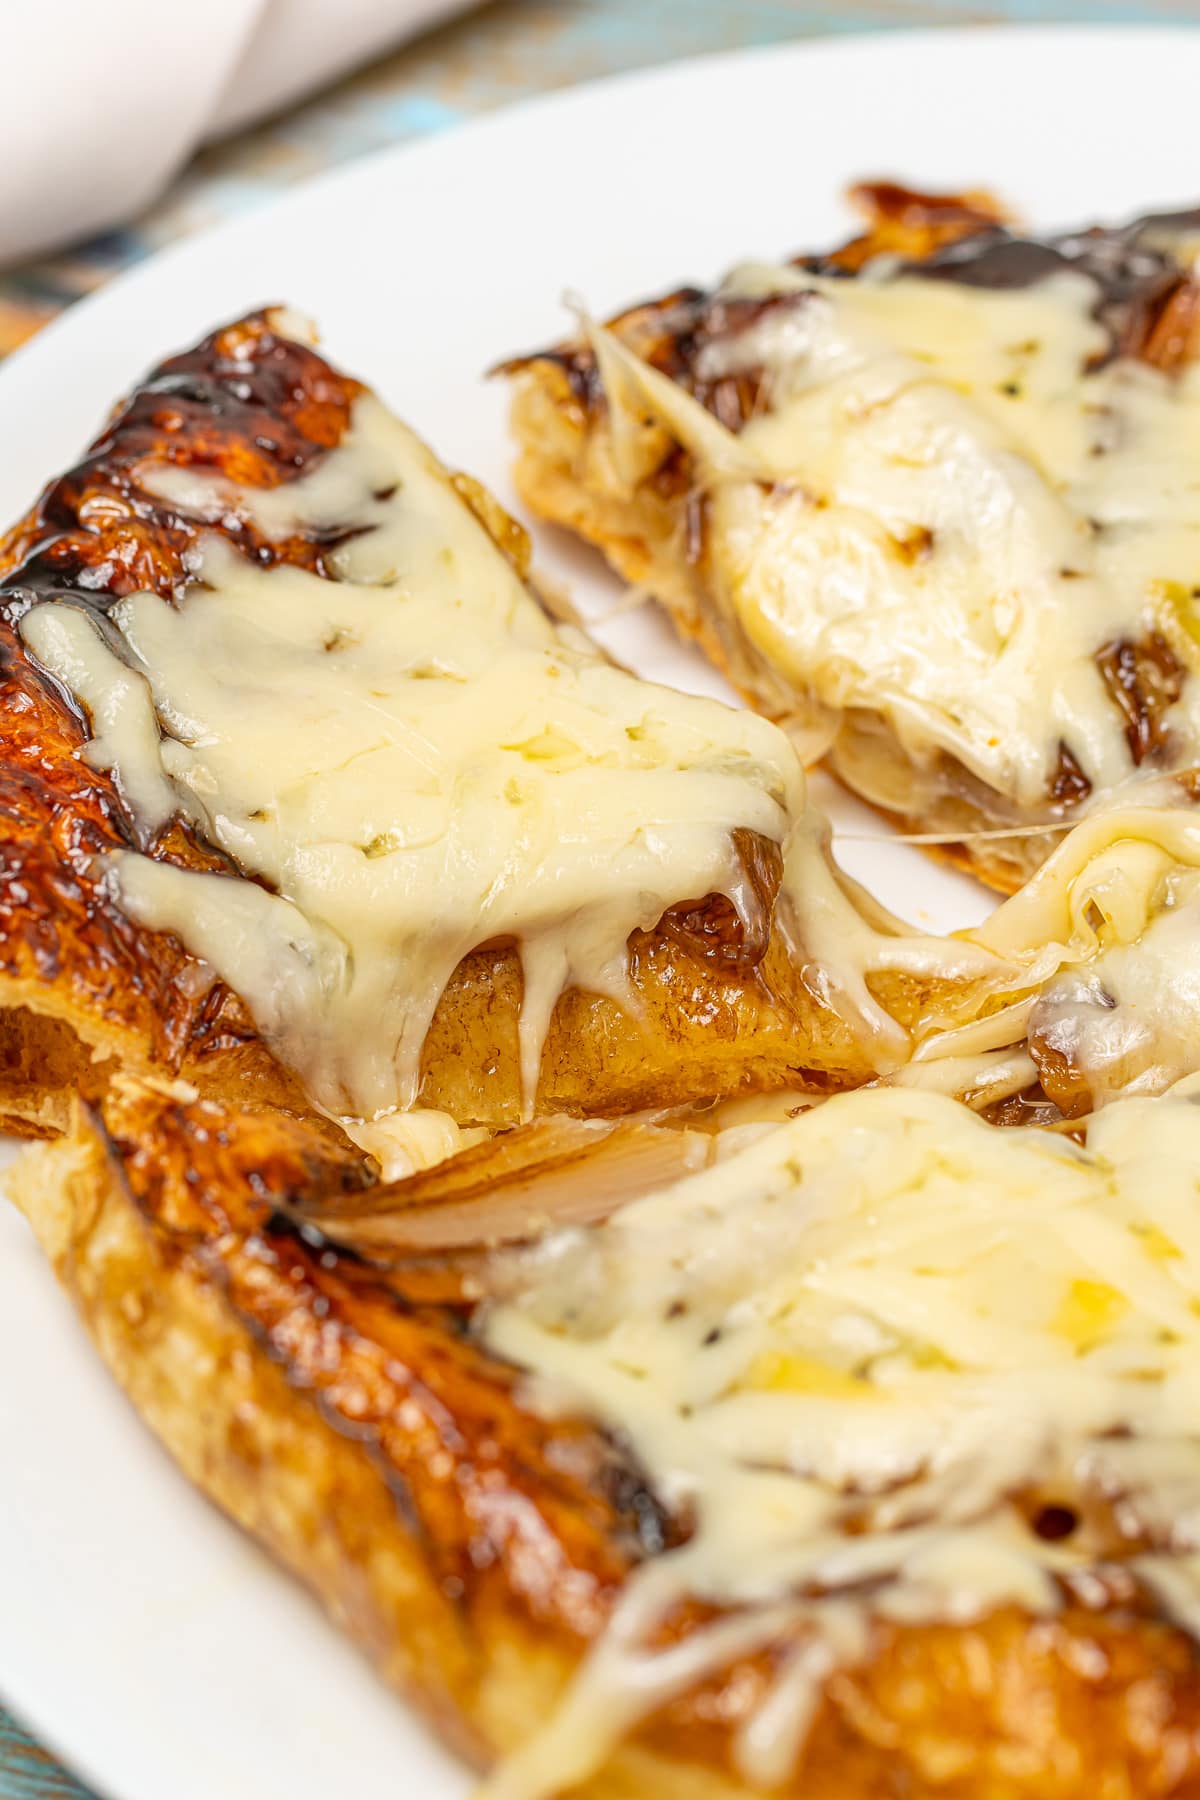 Melting cheese on top of a freshly baked caramelized onion tart.